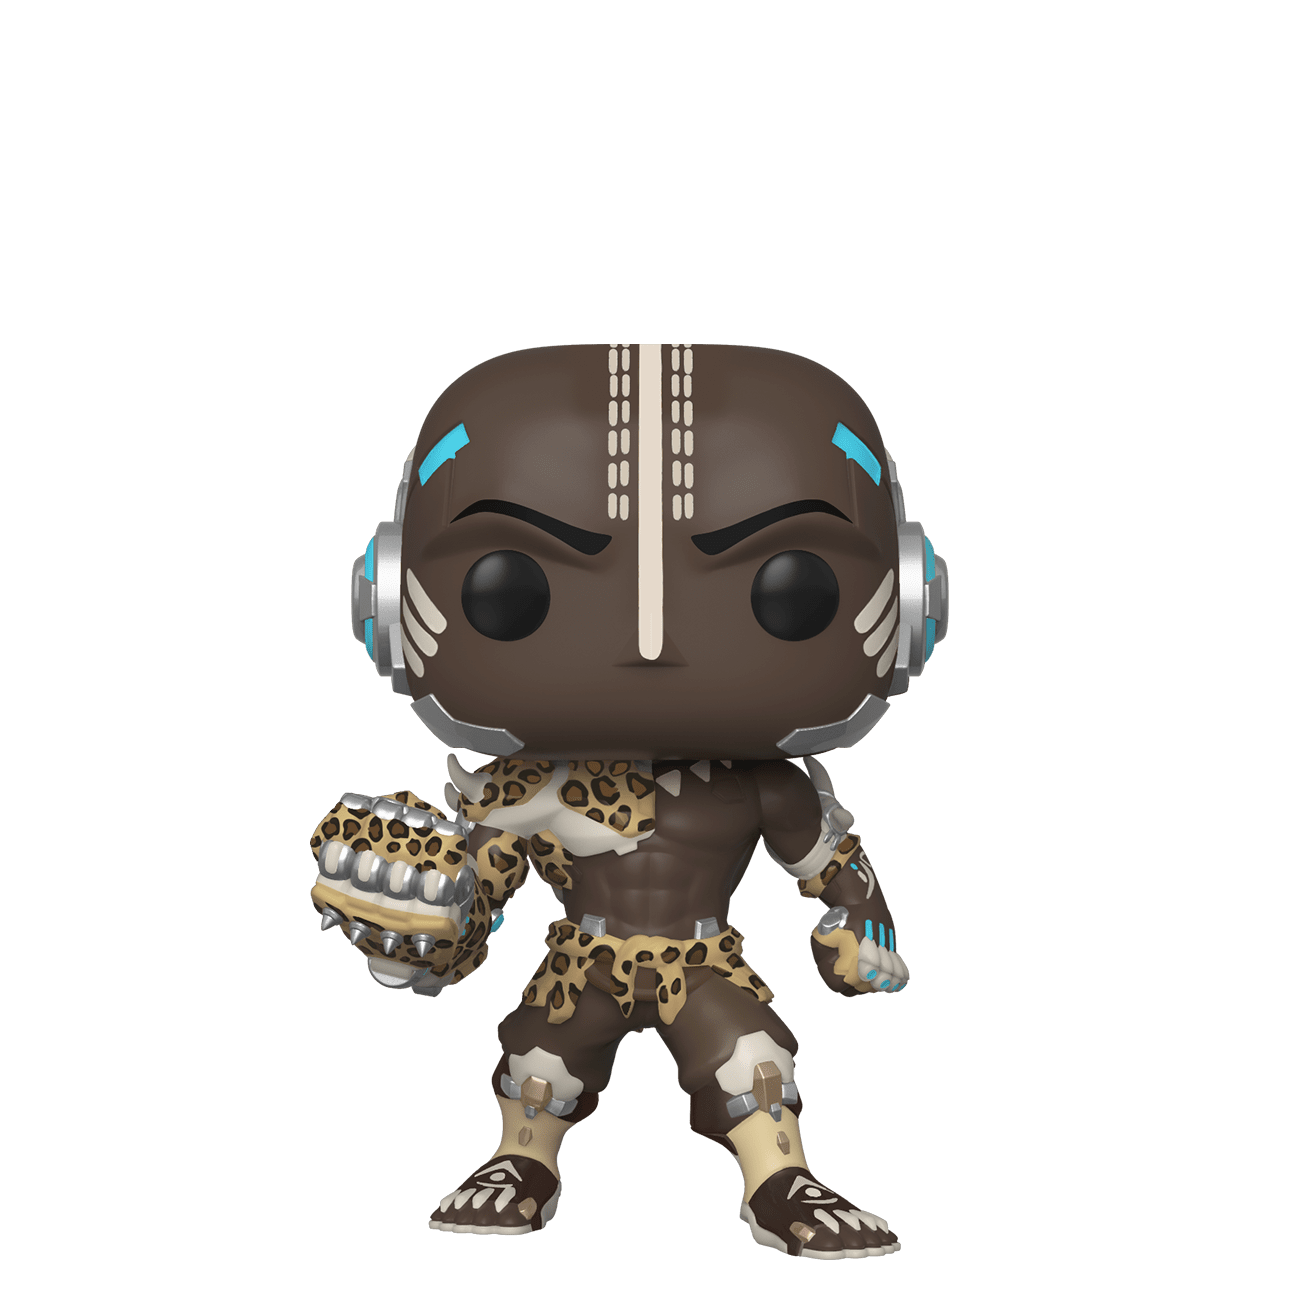 Funko Pop! Games - Overwatch #351 - Leopard Doomfist (Exclusive) - Simply Toys